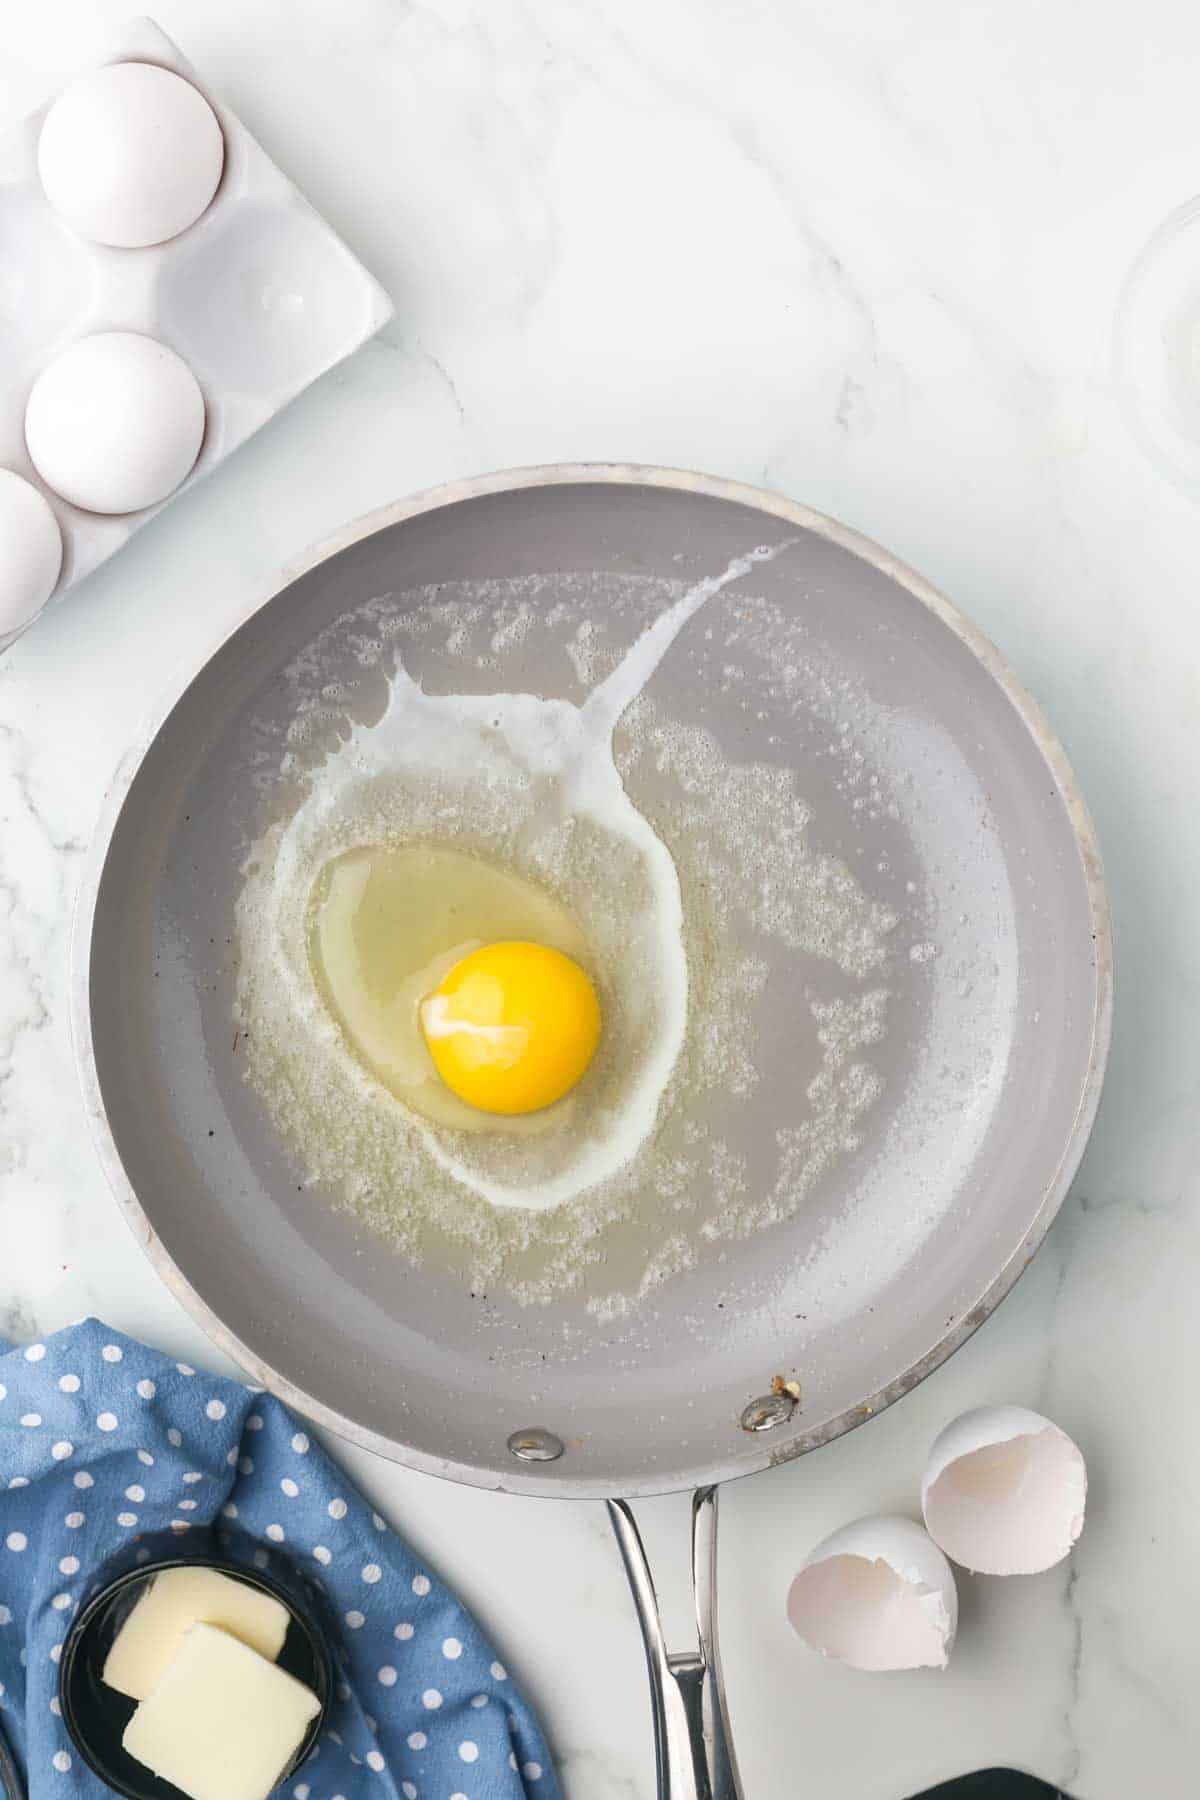 sauté pan with an egg cooking in it